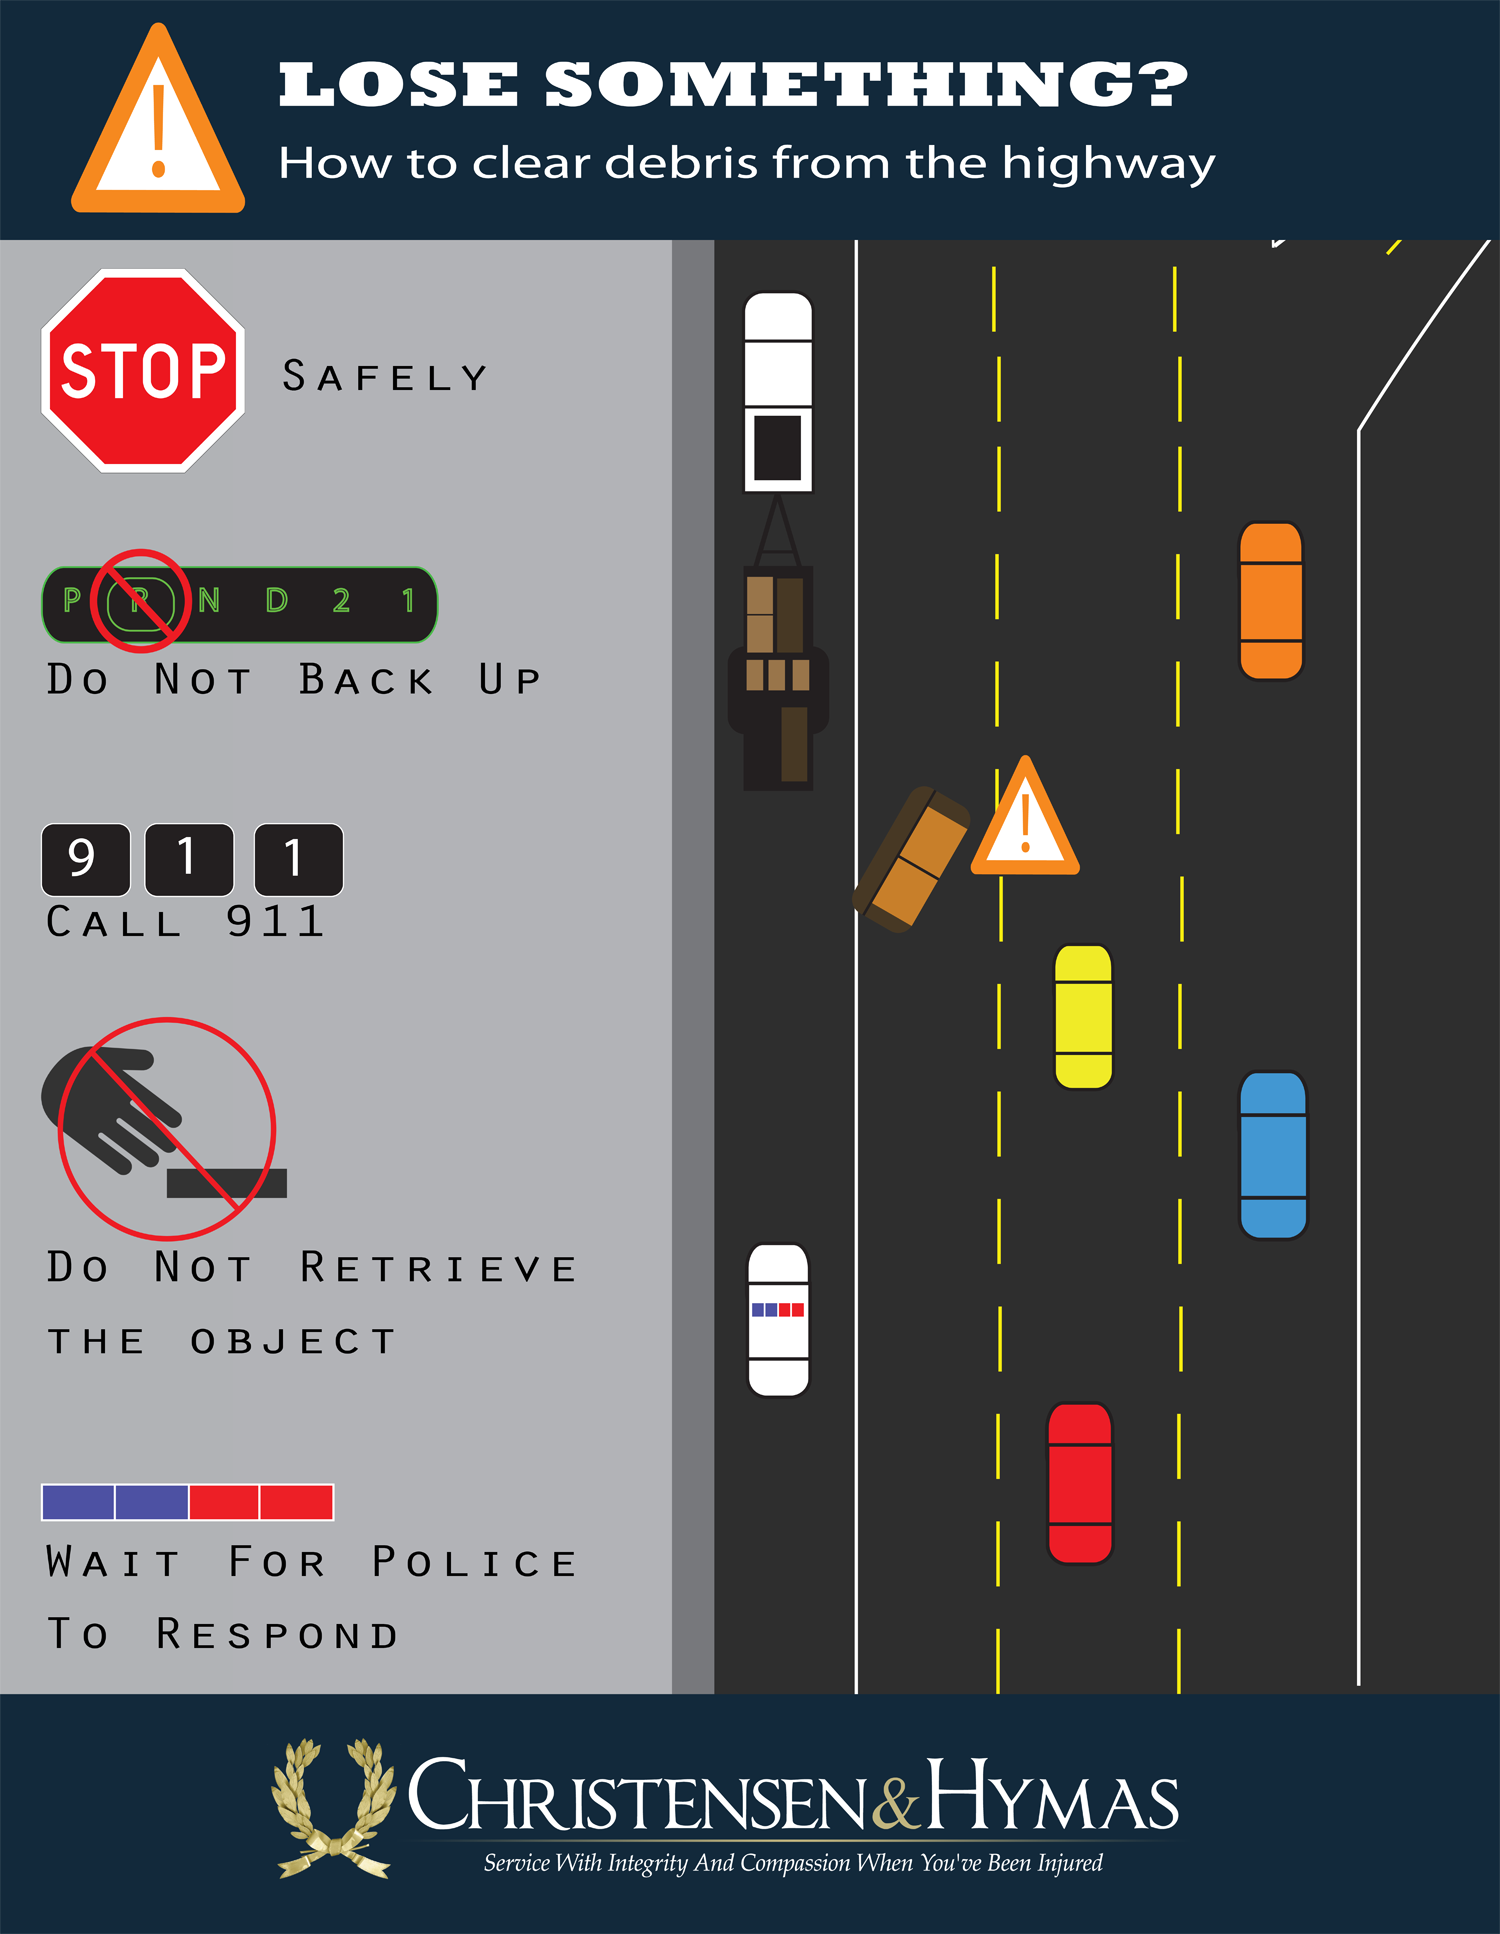 Infographic sharing what to do when you lose something on the highway